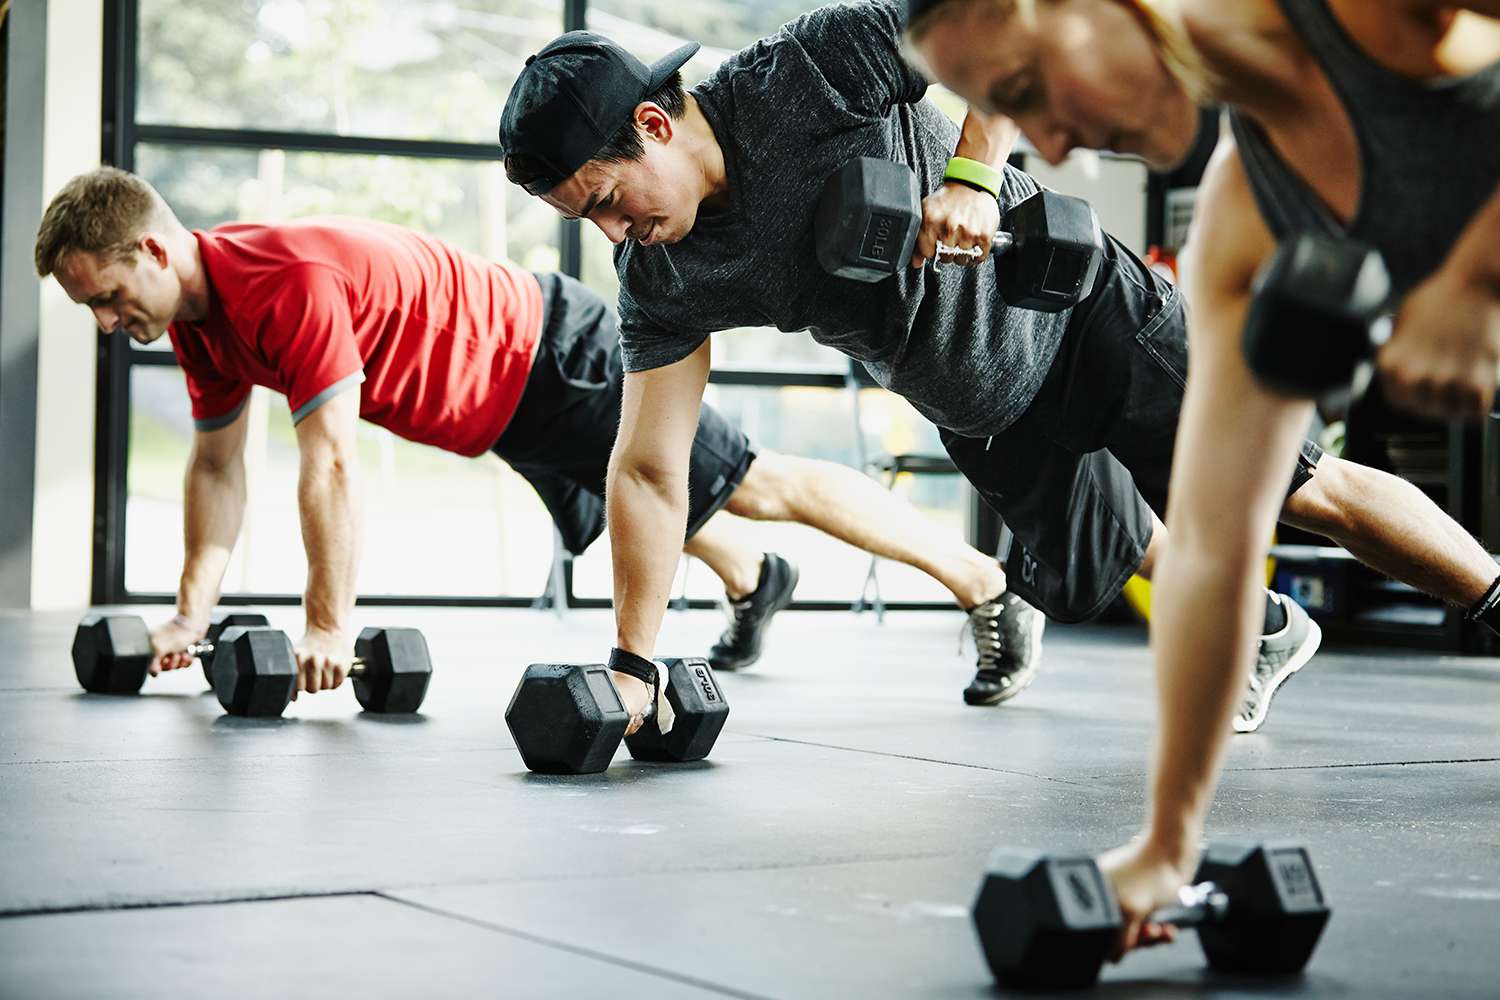 Group Workout Classes Linked to Coronavirus Infections | PEOPLE.com